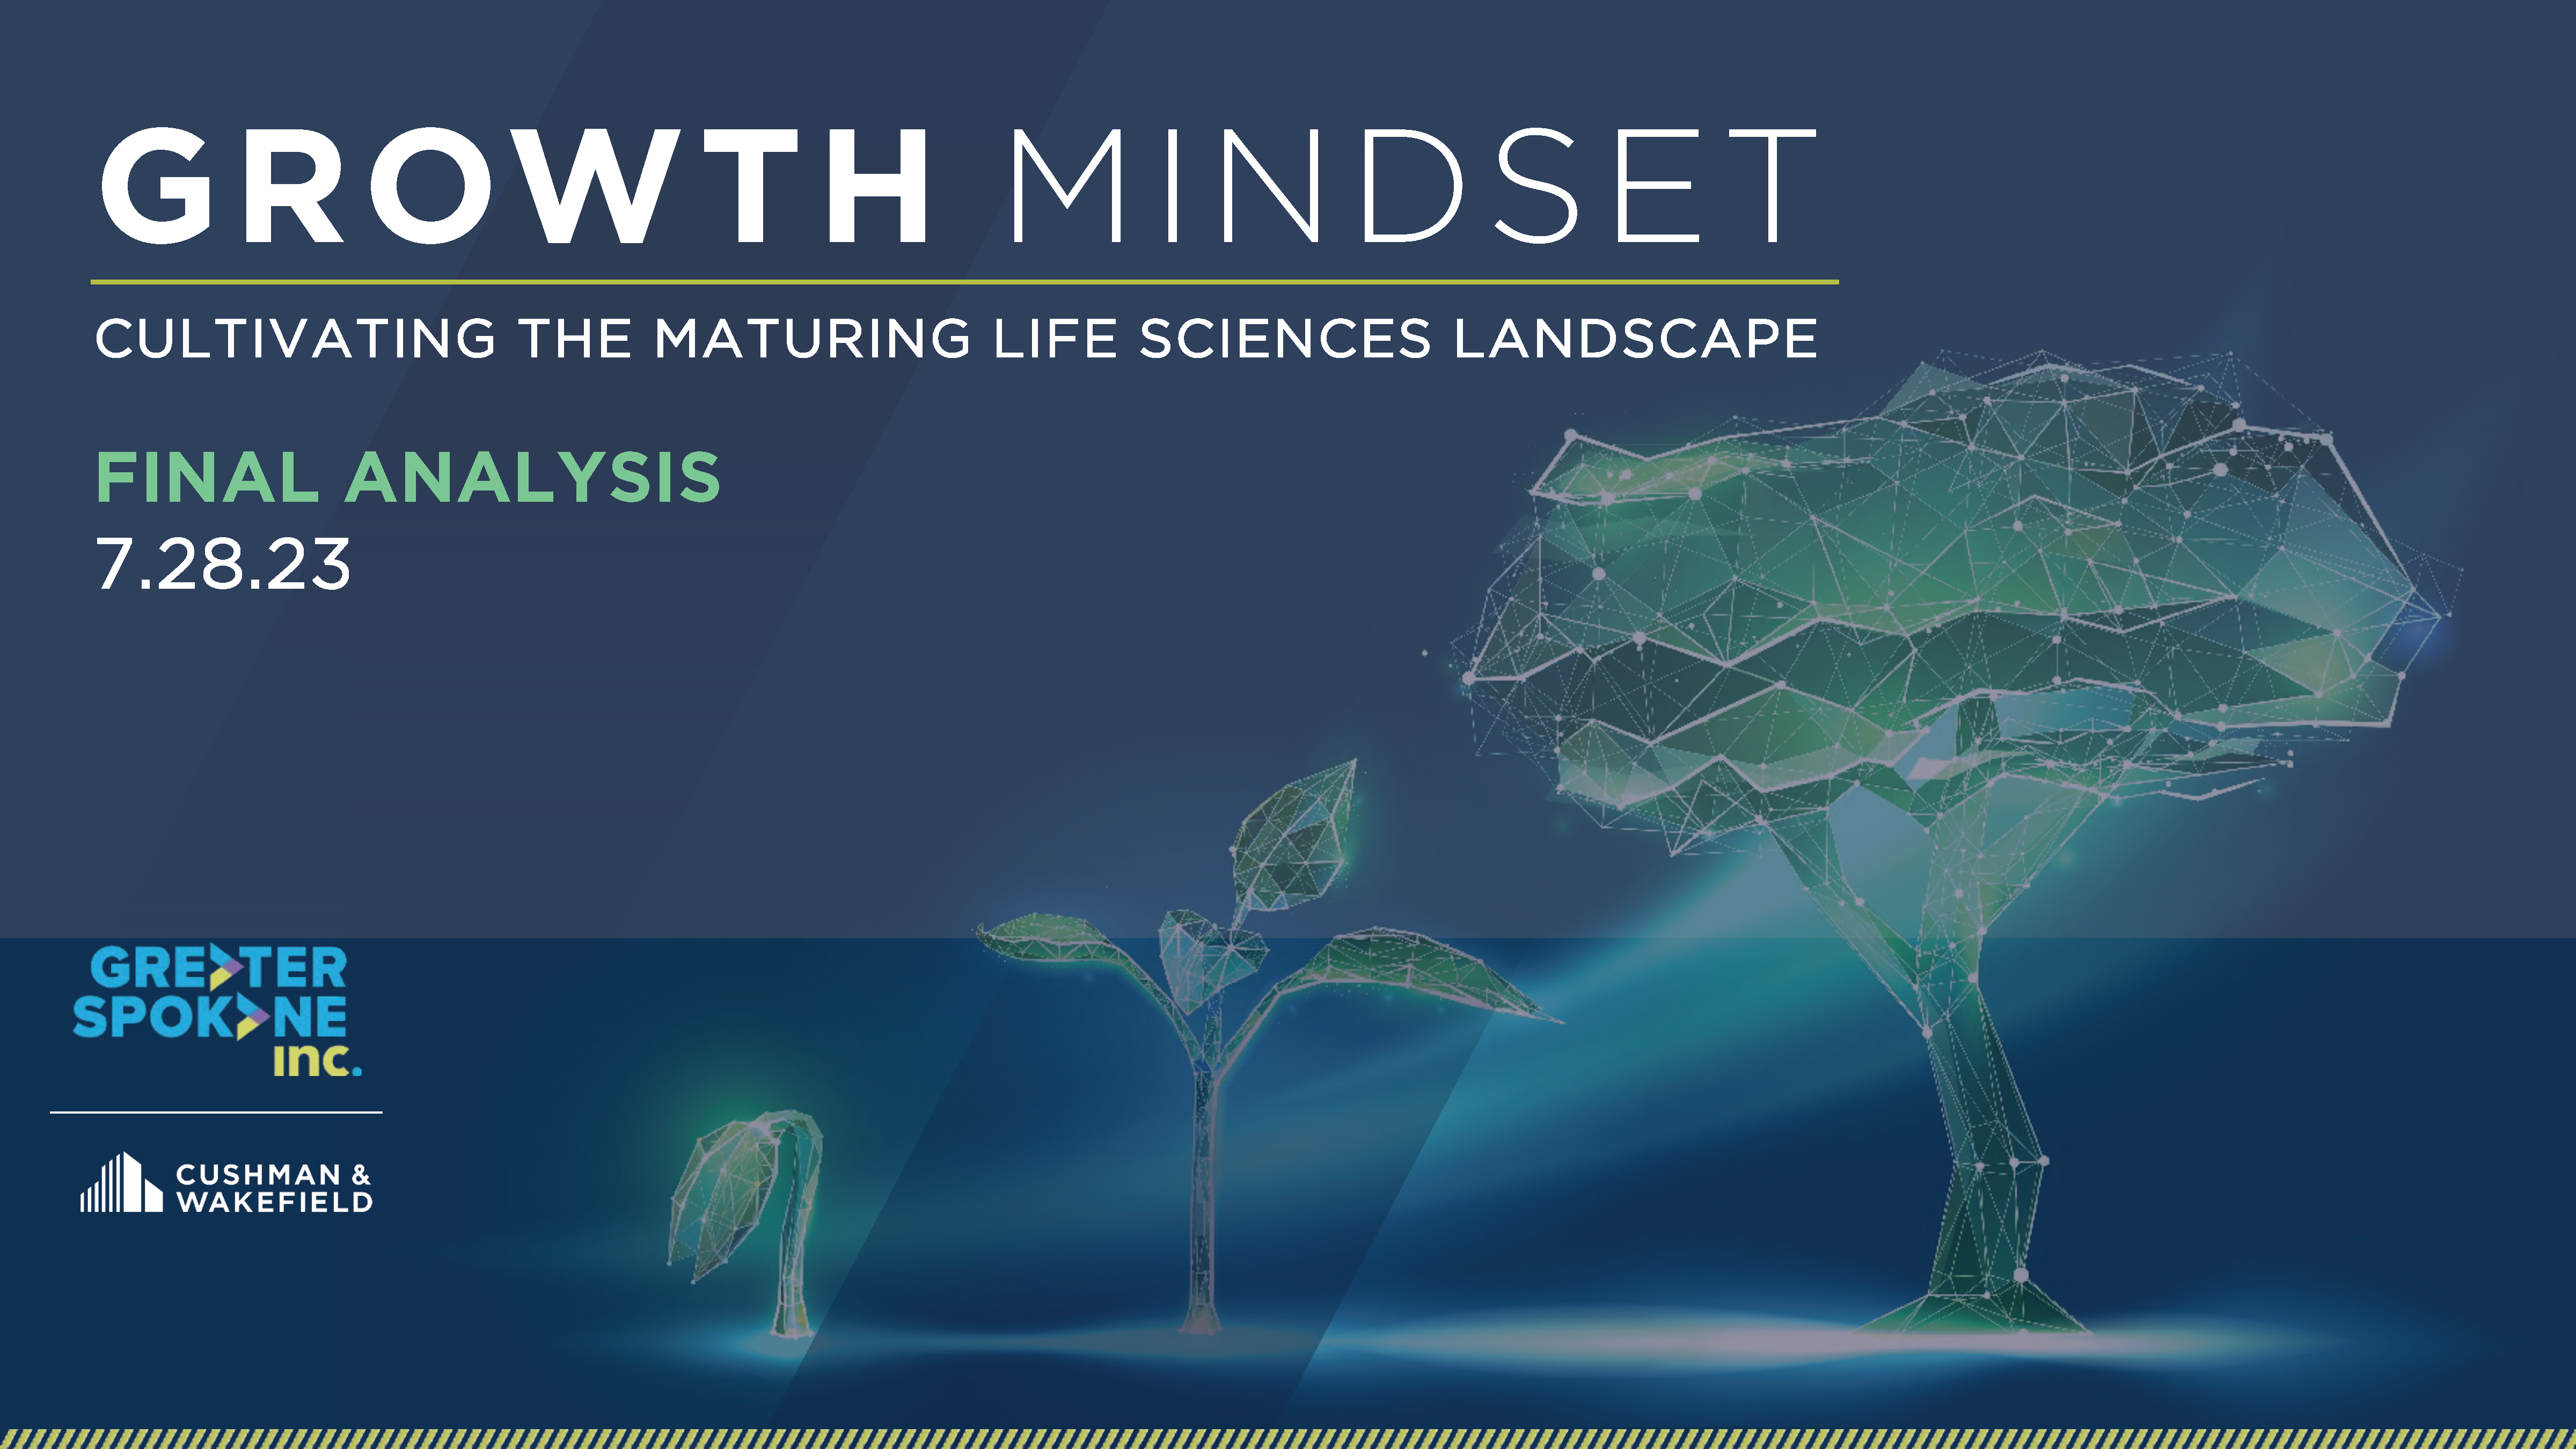 Available for Download: Life Science Asset & Landscape Study Report